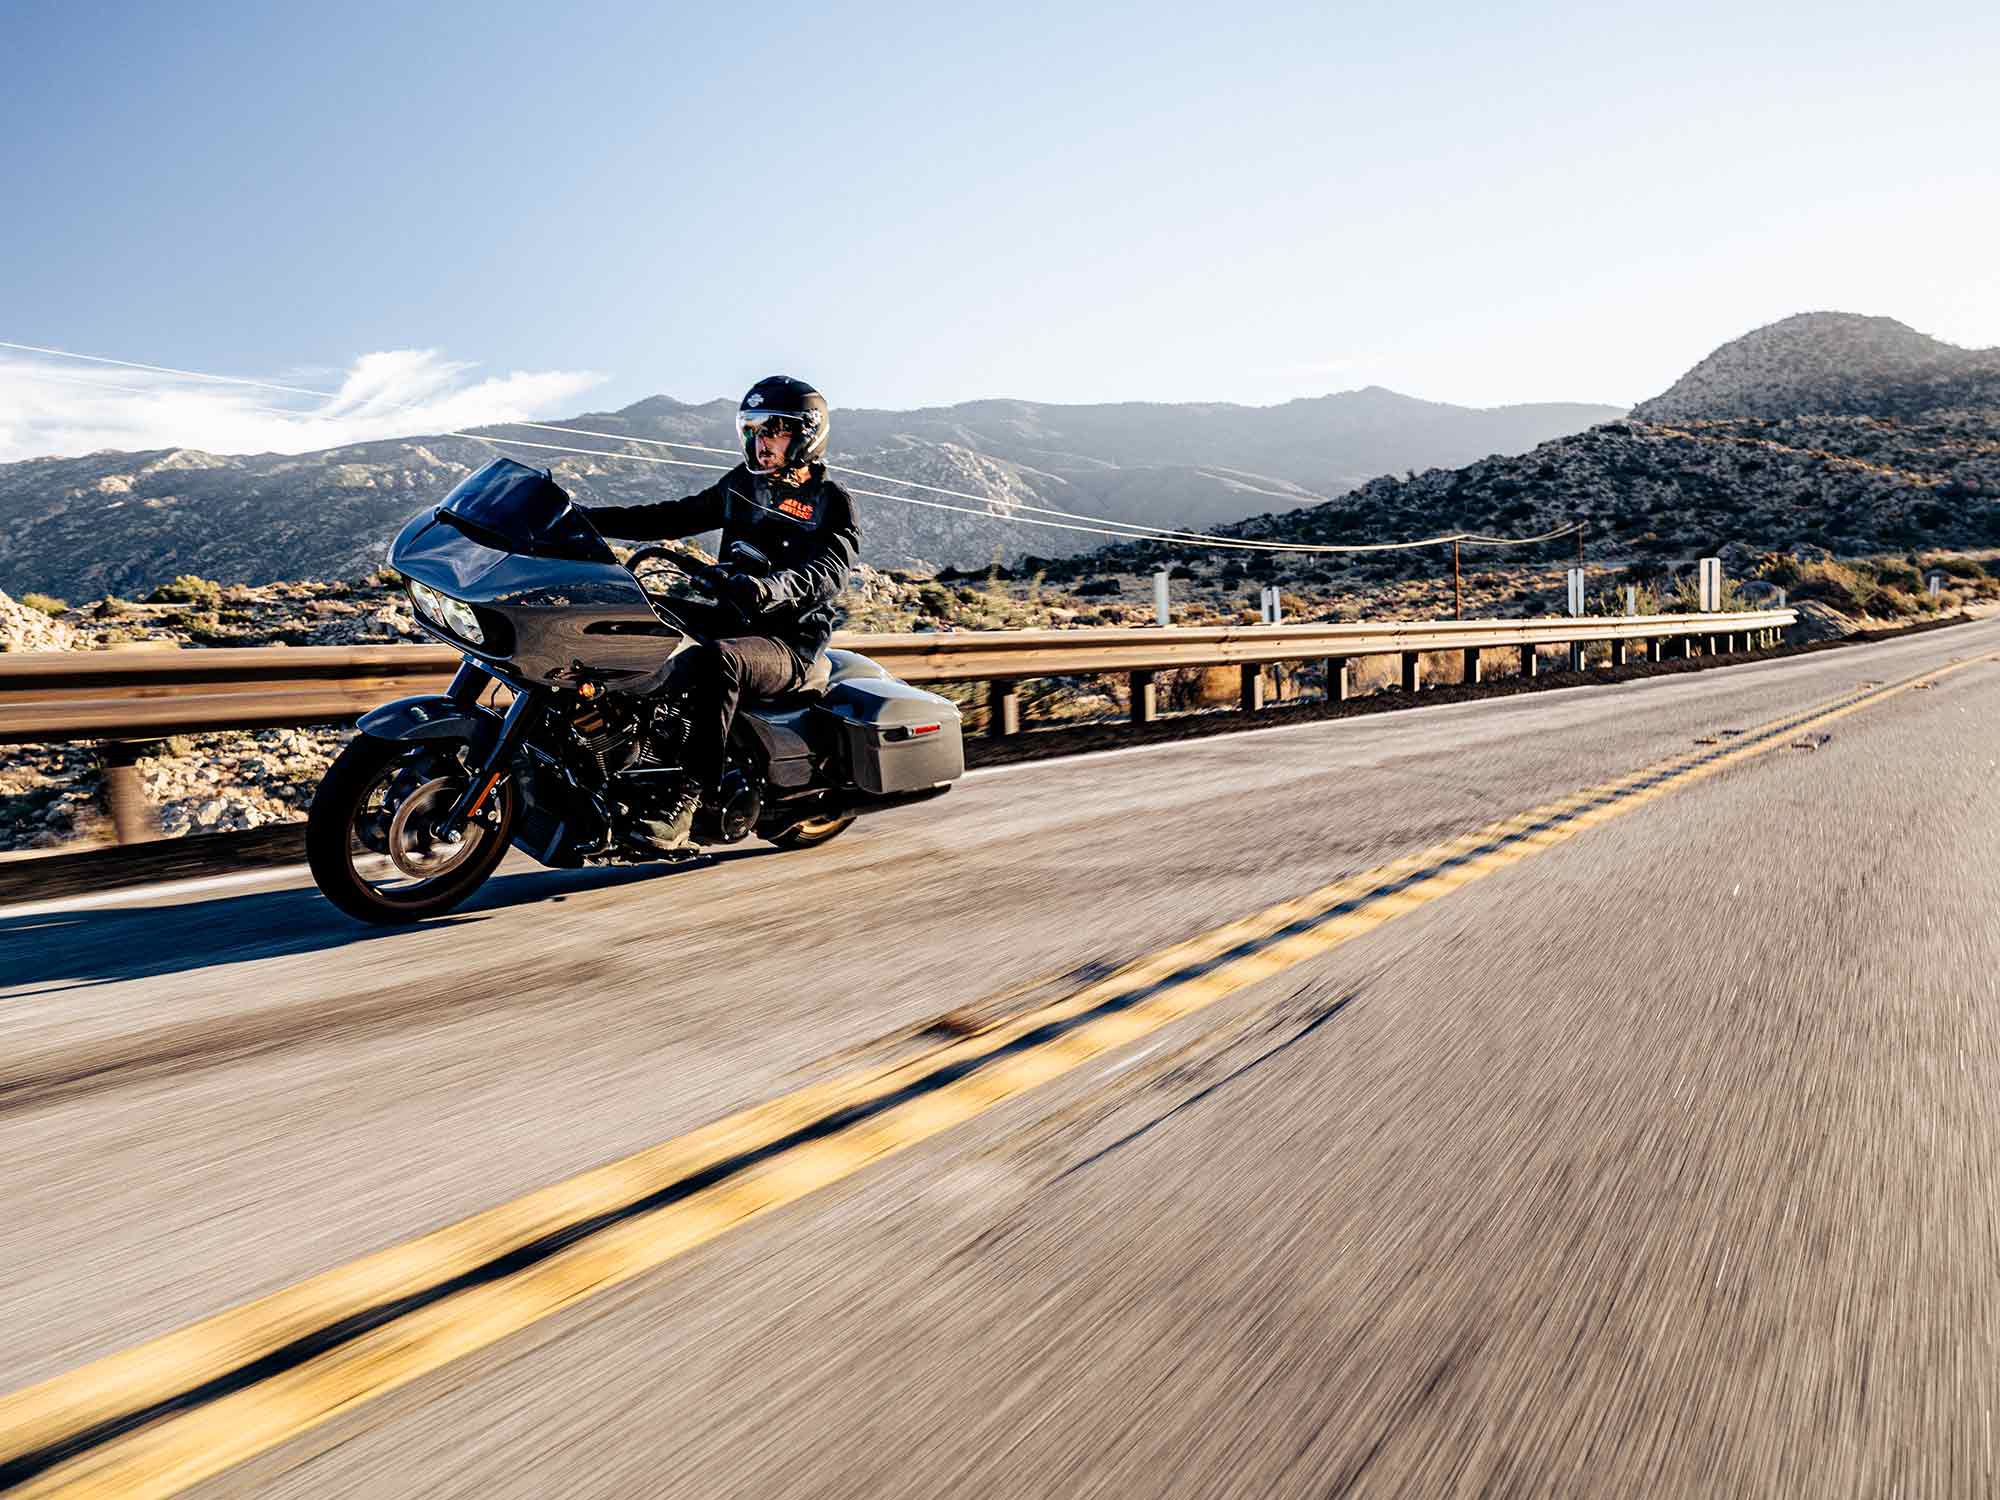 Tour in style with the 2022 Road Glide ST.